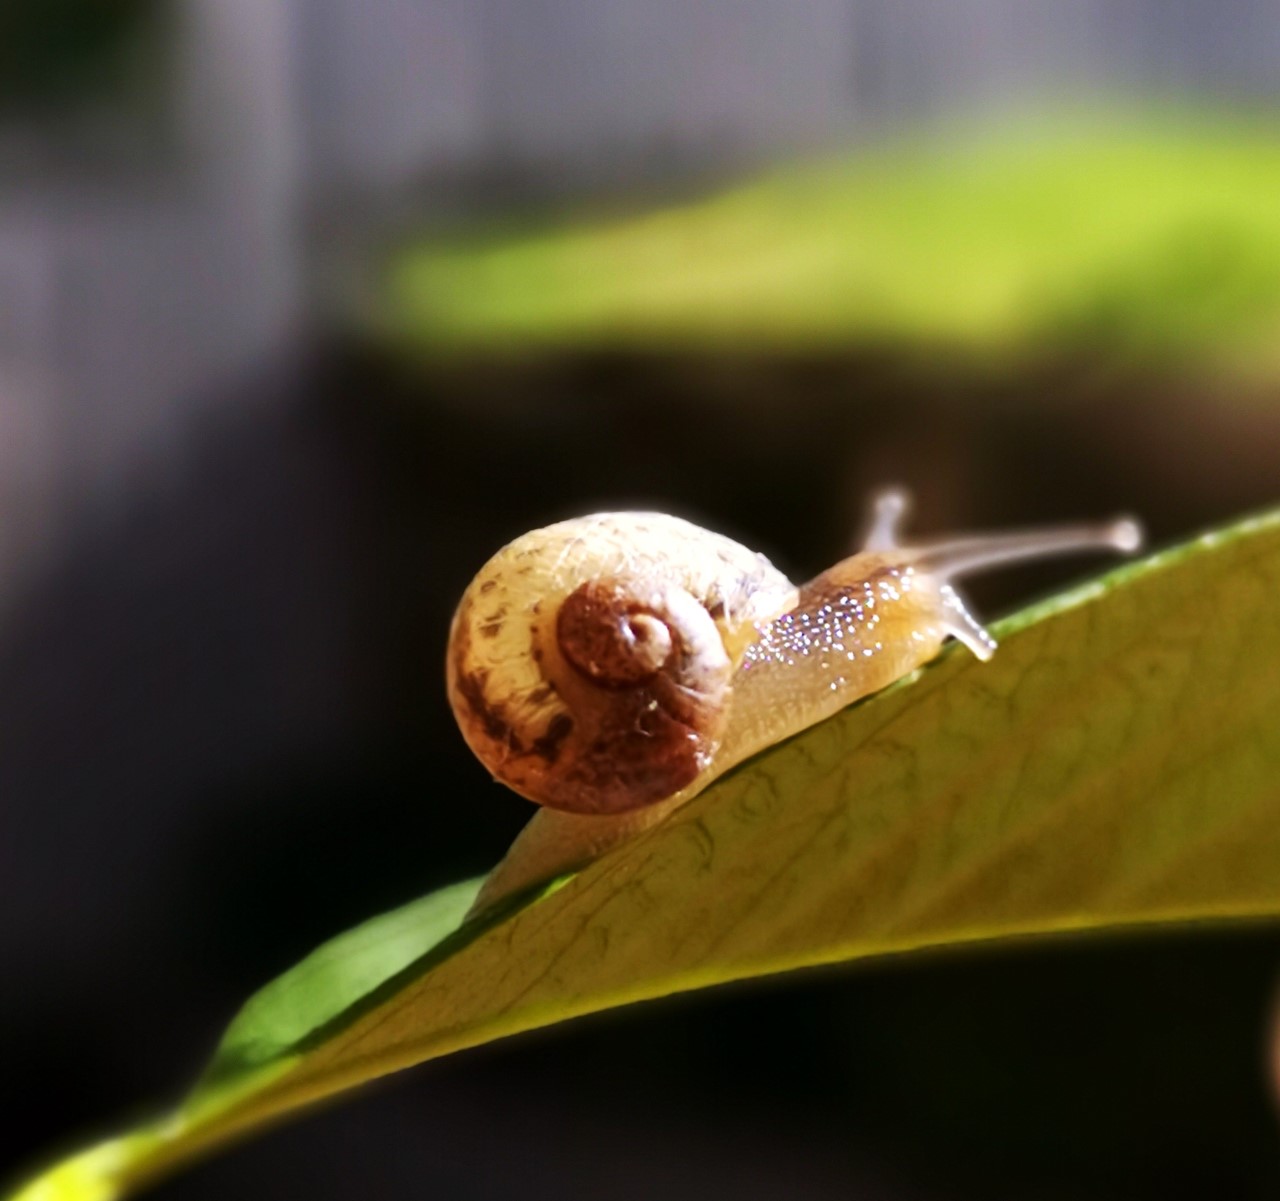 Name: Aaron. Prize: First. Geometry in nature. A spiral is a curve that stems from a point, moving further away as it revolves around the point. Spirals are everywhere in nature and they are part of our daily life. Here is a photo of my garden friend, see the spiral.
